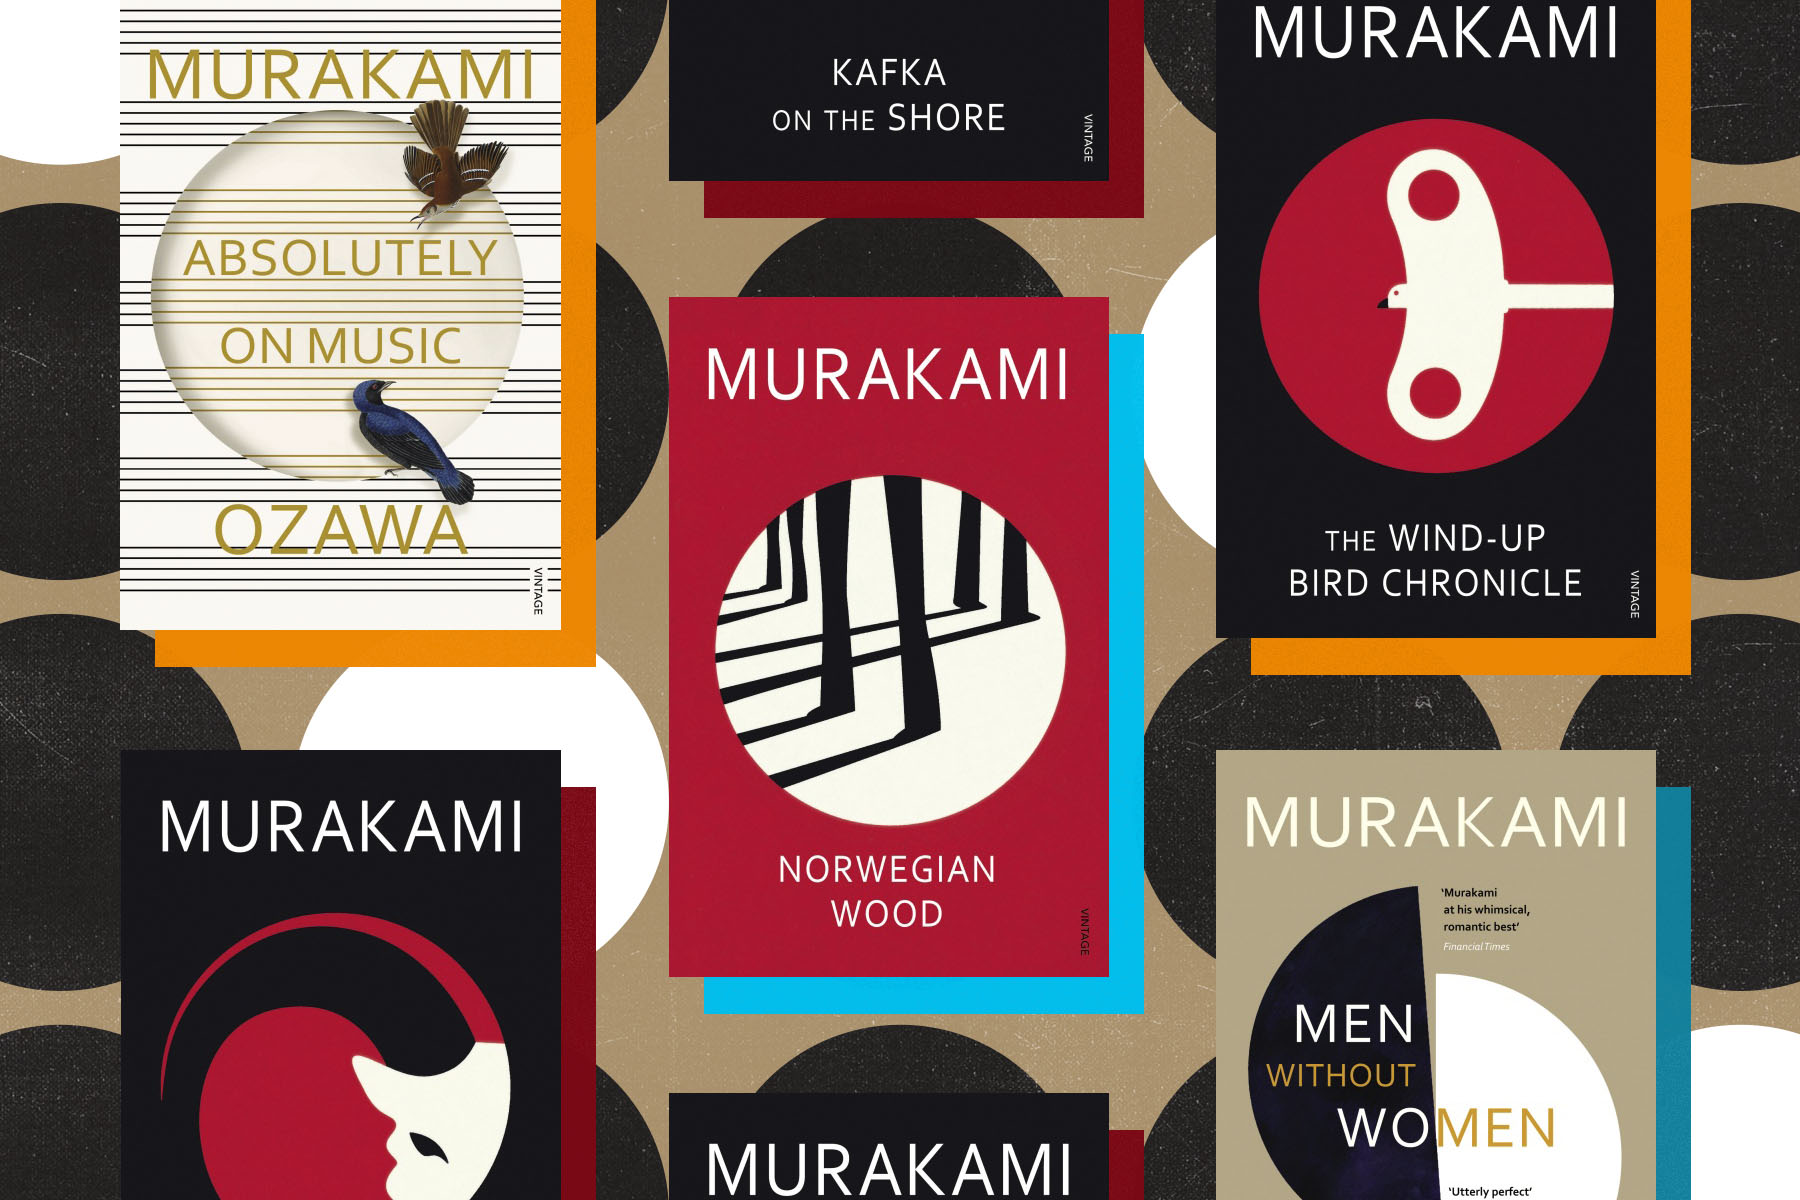 A flatlay of some of Haruki Murakami's most notable works.